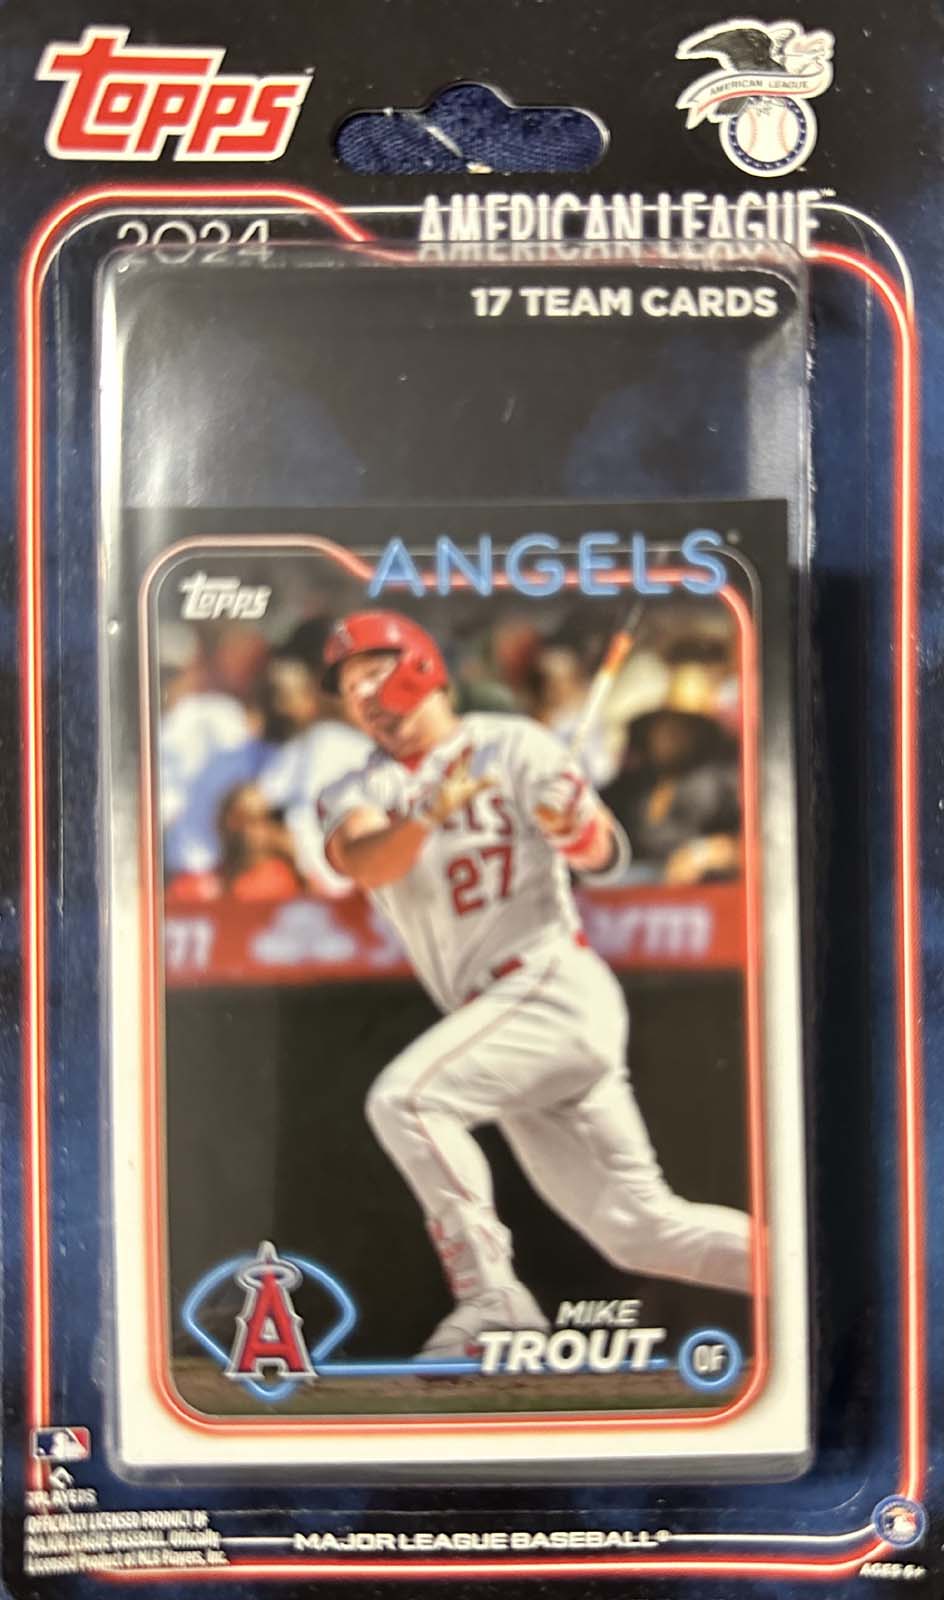 2024 Topps American League All Star Standouts Factory Sealed Limited Edition 17 Card Team Set Featuring Mike Trout and Aaron Judge Plus